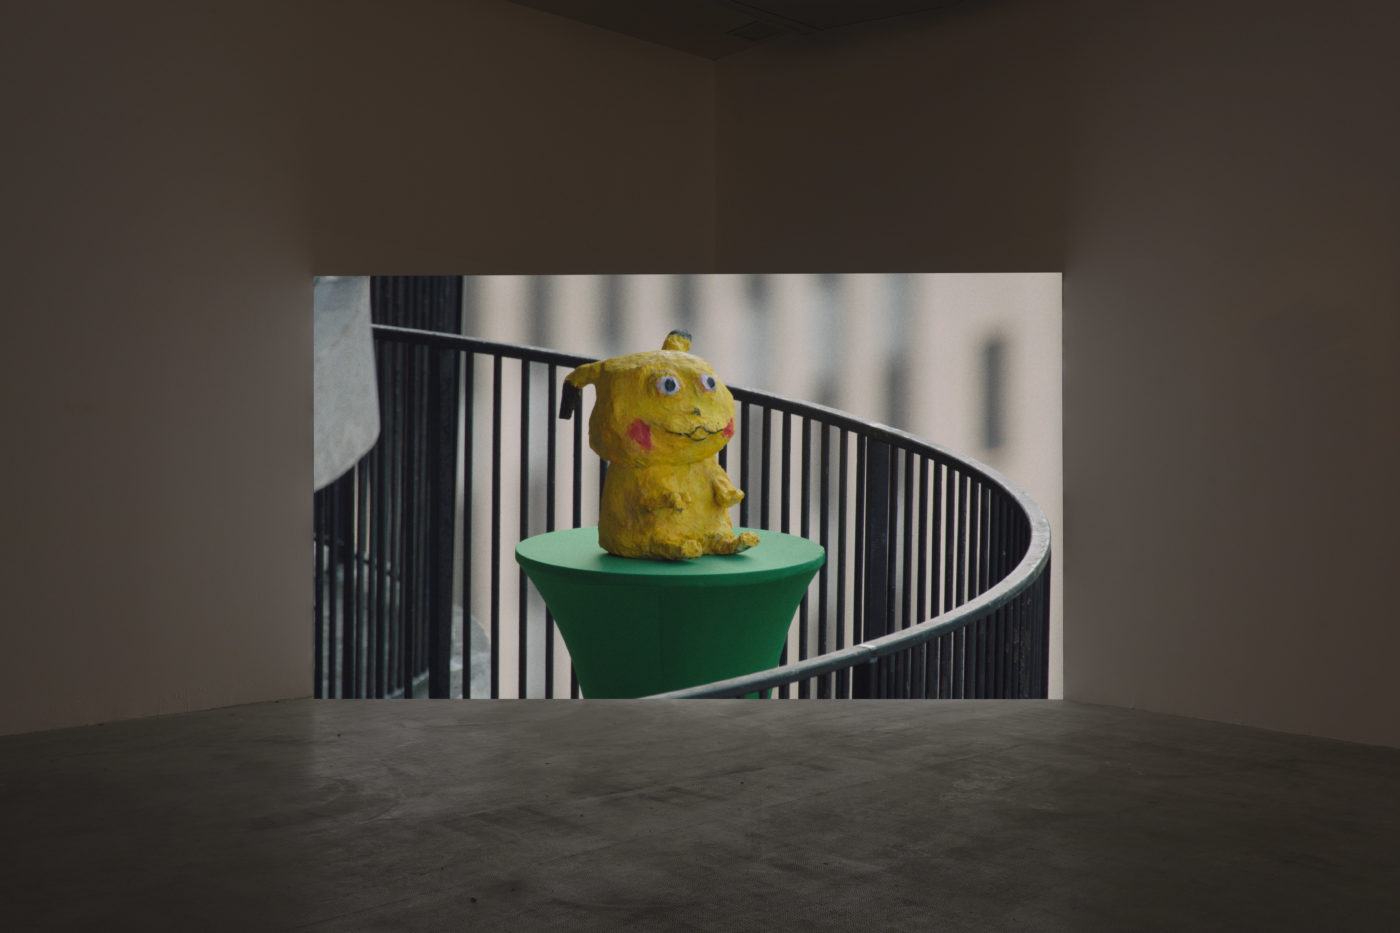 Andrew Norman Wilson, “Lavender Town Syndrome” exhibition view, Ordet, Milan, 2019/2020